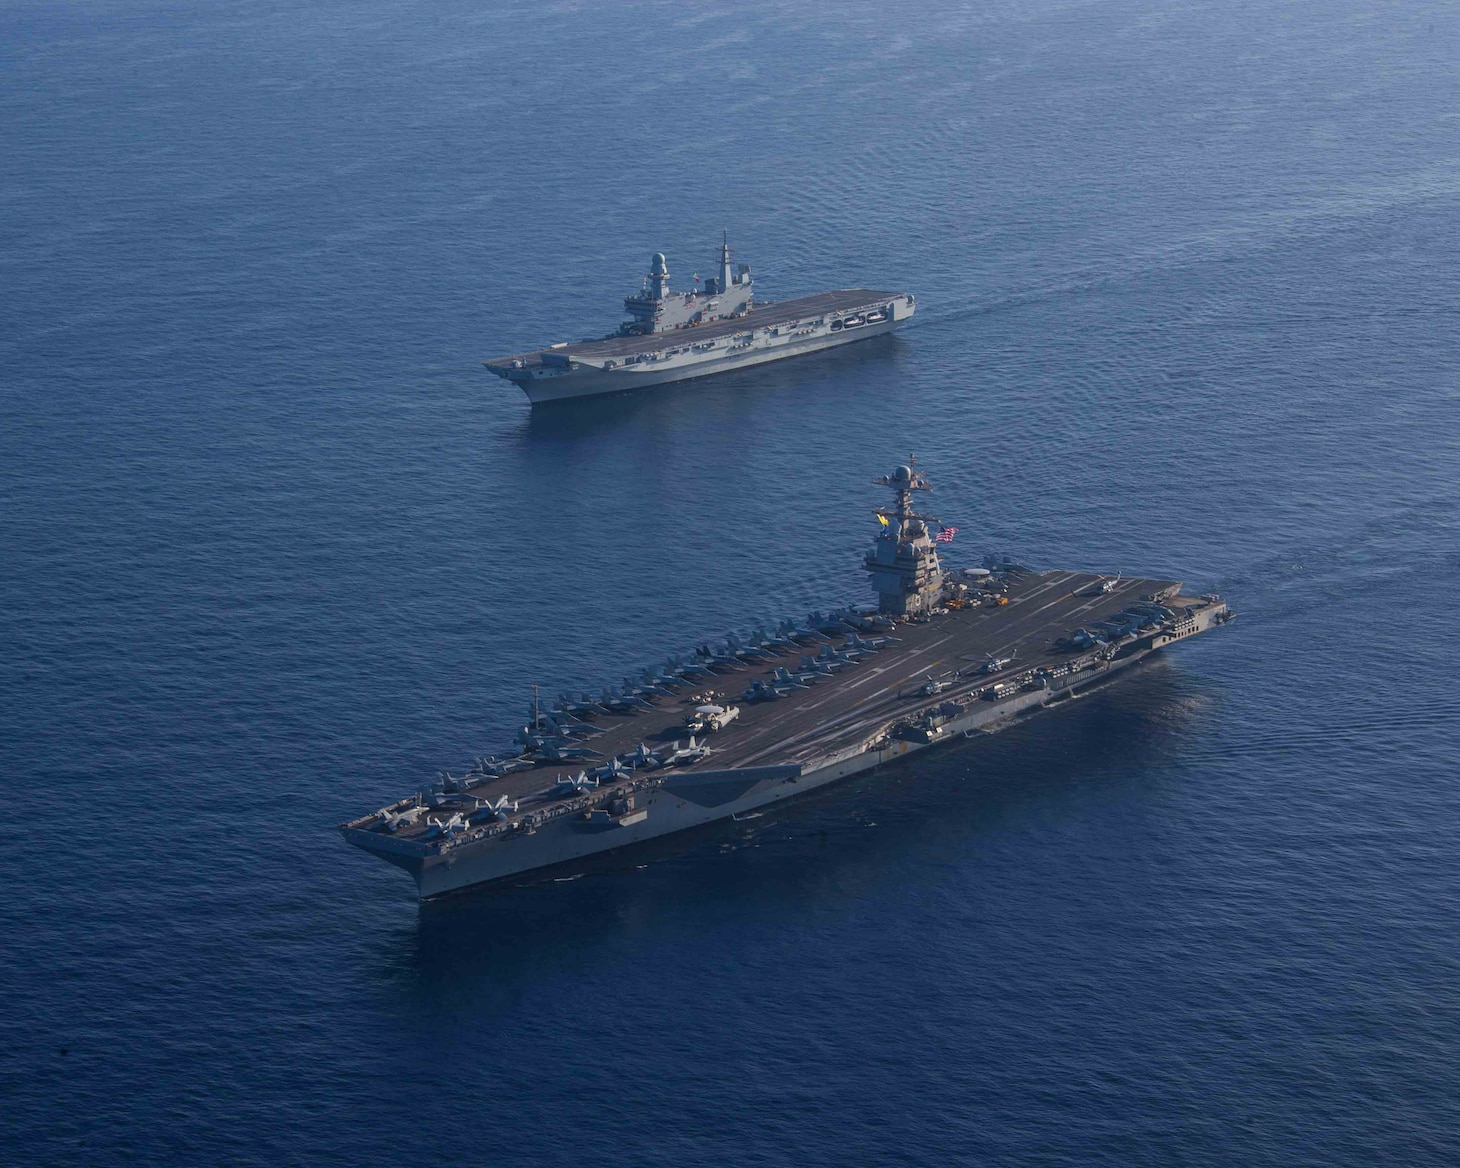 The world's largest aircraft carrier USS Gerald R. Ford (CVN 78) and Italian Navy aircraft carrier ITS Cavour (C 550), steam in formation in the Ionian Sea, Oct. 4, 2023 Gerald R. Ford is the U.S. Navy's newest and most advanced aircraft carrier, representing a generational leap in the U.S. Navy's capacity to project power on a global scale. The Gerald R. Ford Carrier Strike Group is on a scheduled deployment in the U.S. Naval Forces Europe area of operations, employed by U.S. Sixth Fleet to defend U.S., allied, and partner interests. (U.S. Navy photo by Mass Communication Specialist 2nd Class Jacob Mattingly)